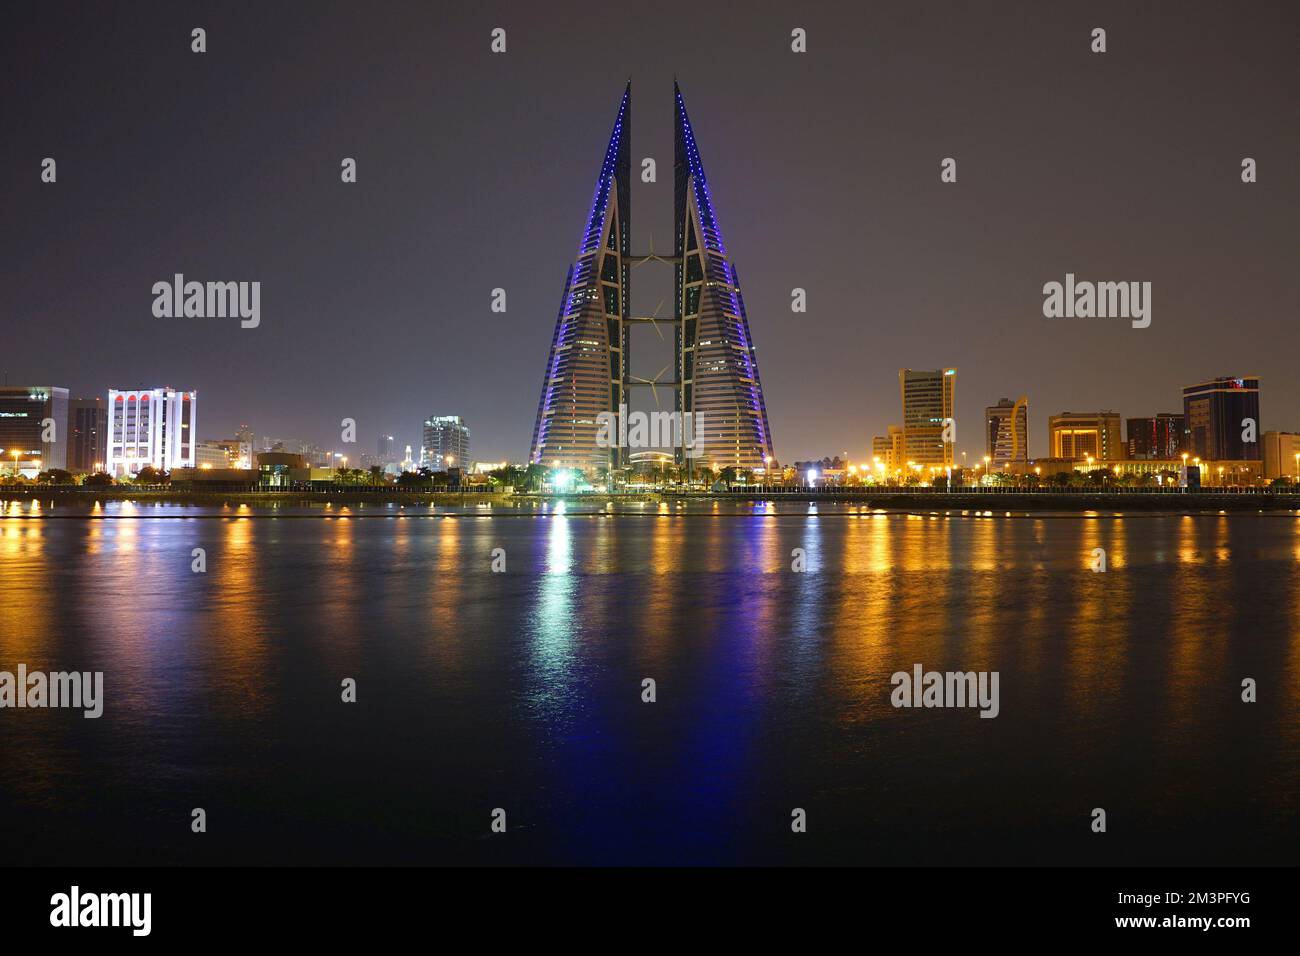 The sail-shaped towers and wind turbines of Bahrain WTC towers signify the maritime history of Manama, Bahrain, Middle East Stock Photo